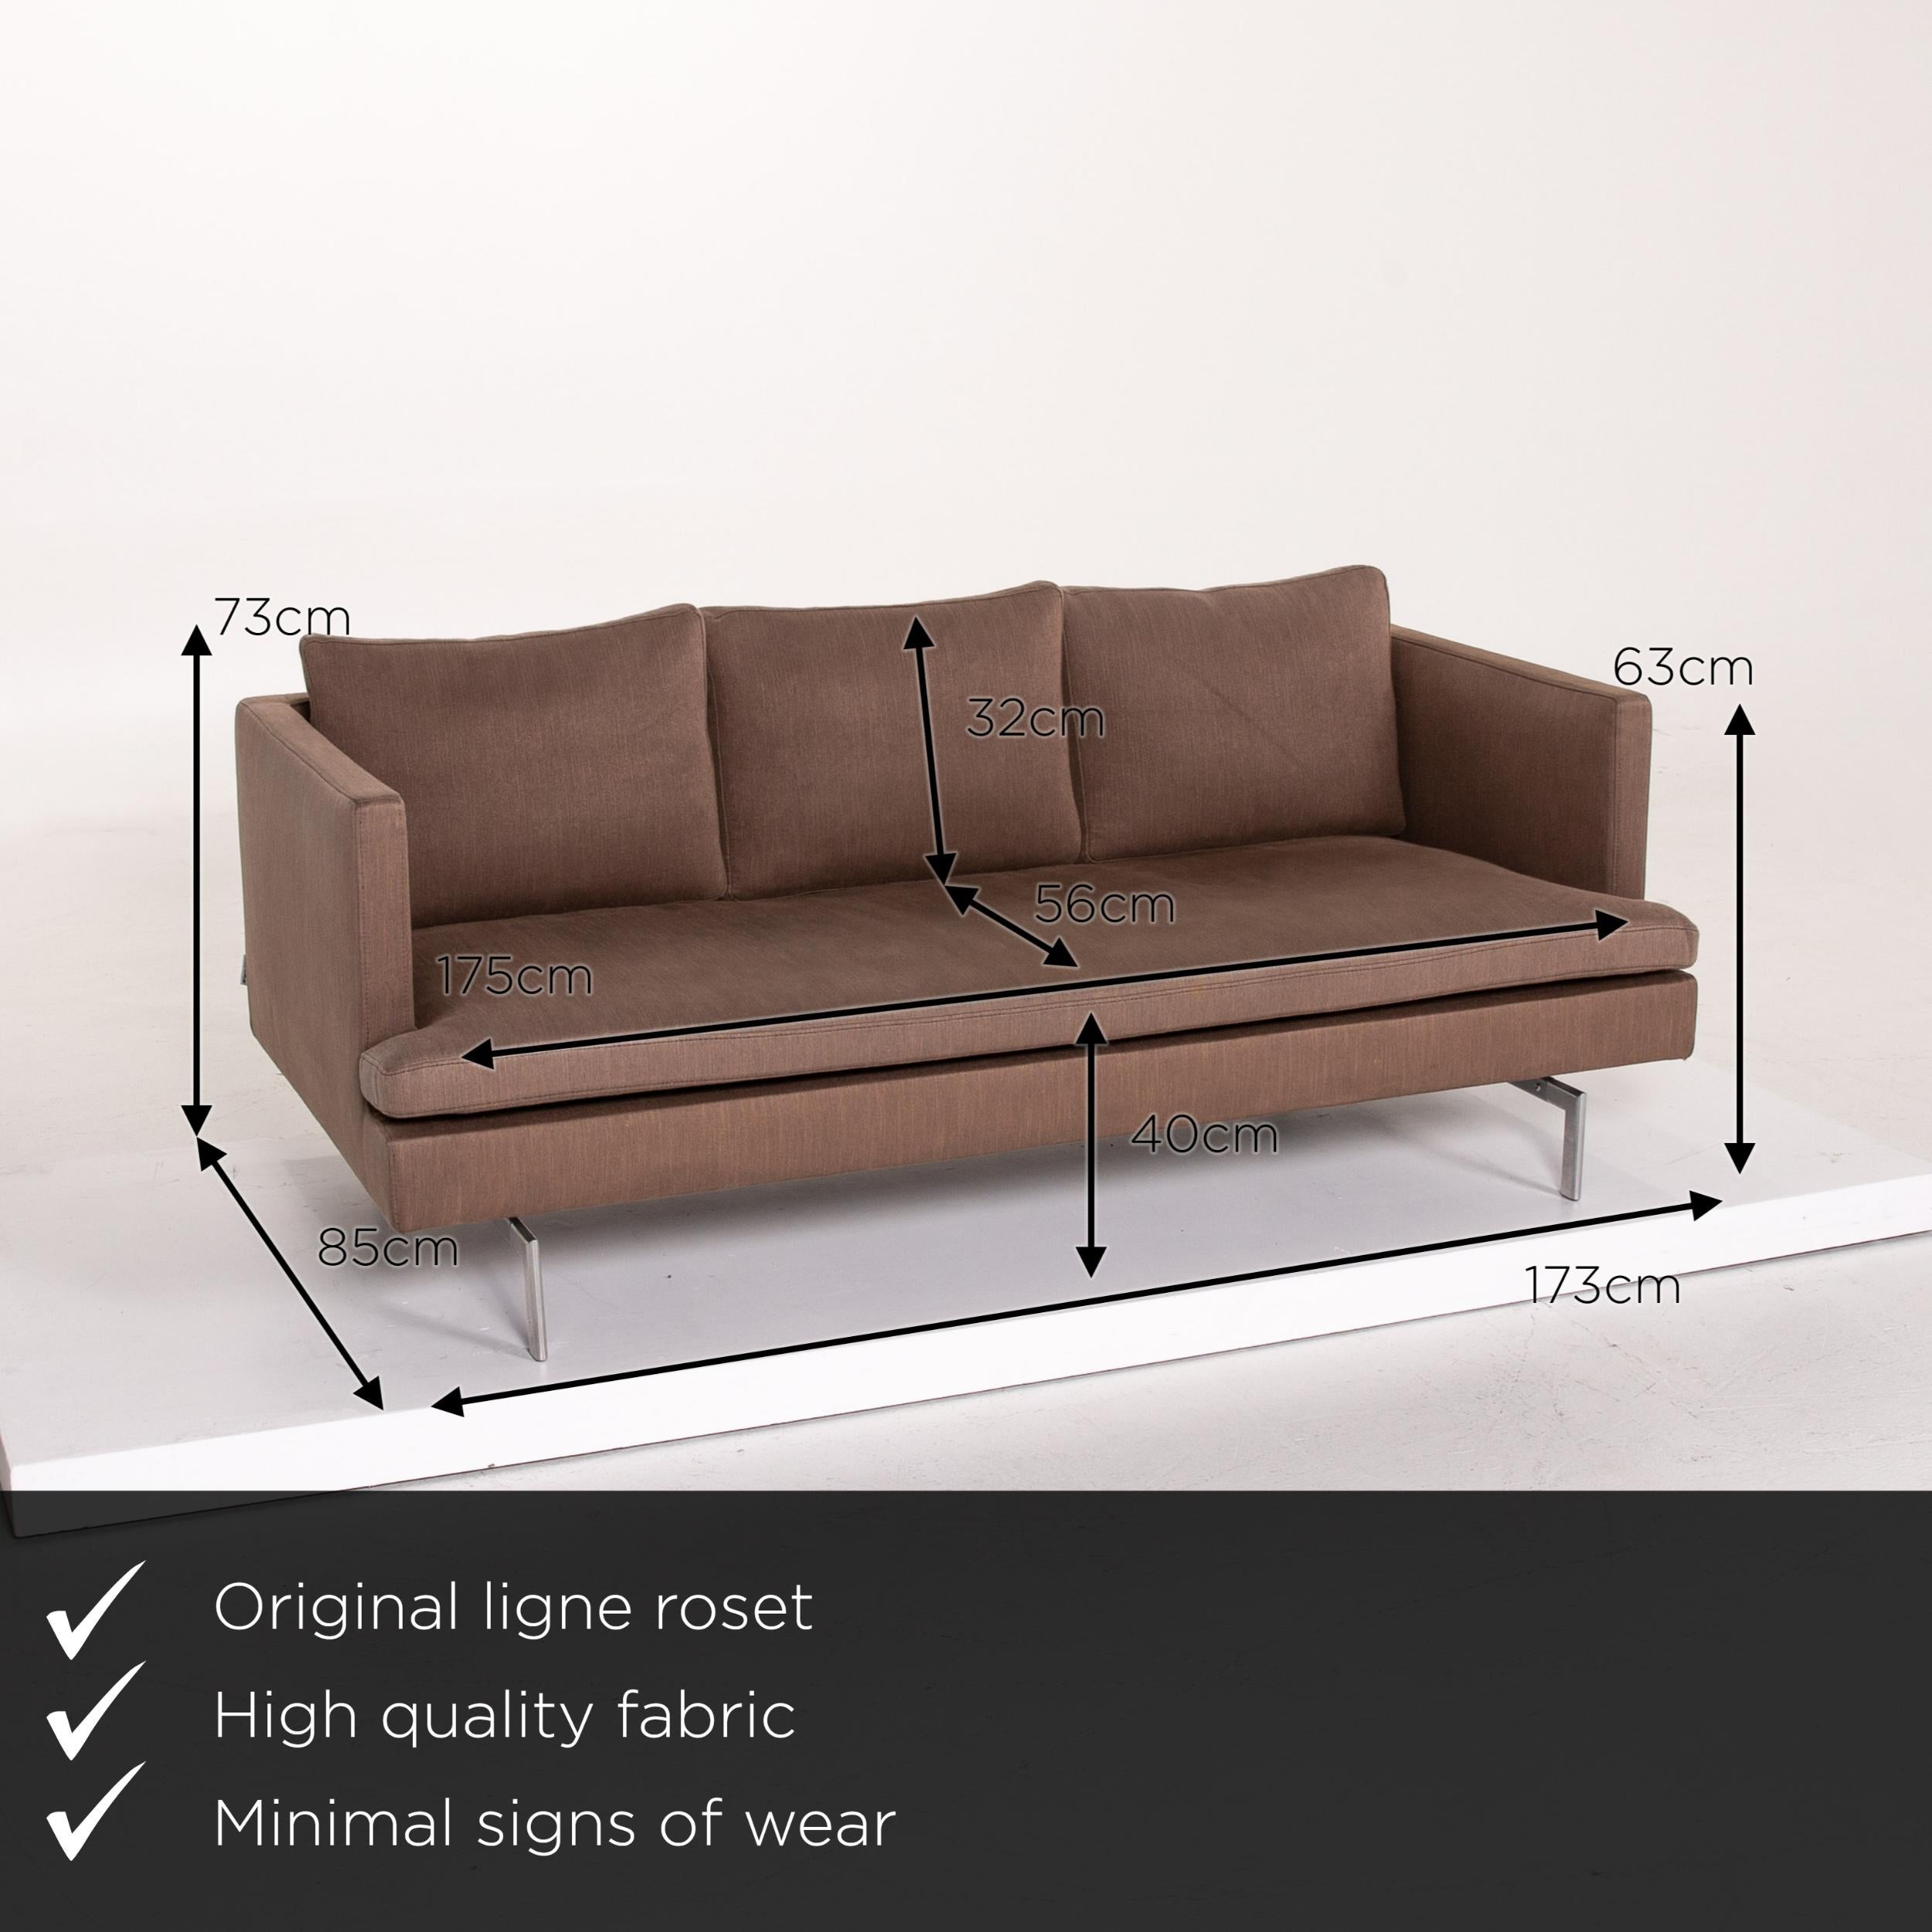 We present to you a ligne roset fabric sofa brown three-seat couch.

 

 Product measurements in centimeters:
 

Depth 85
Width 173
Height 73
Seat height 40
Rest height 63
Seat depth 56
Seat width 175
Back height 32.